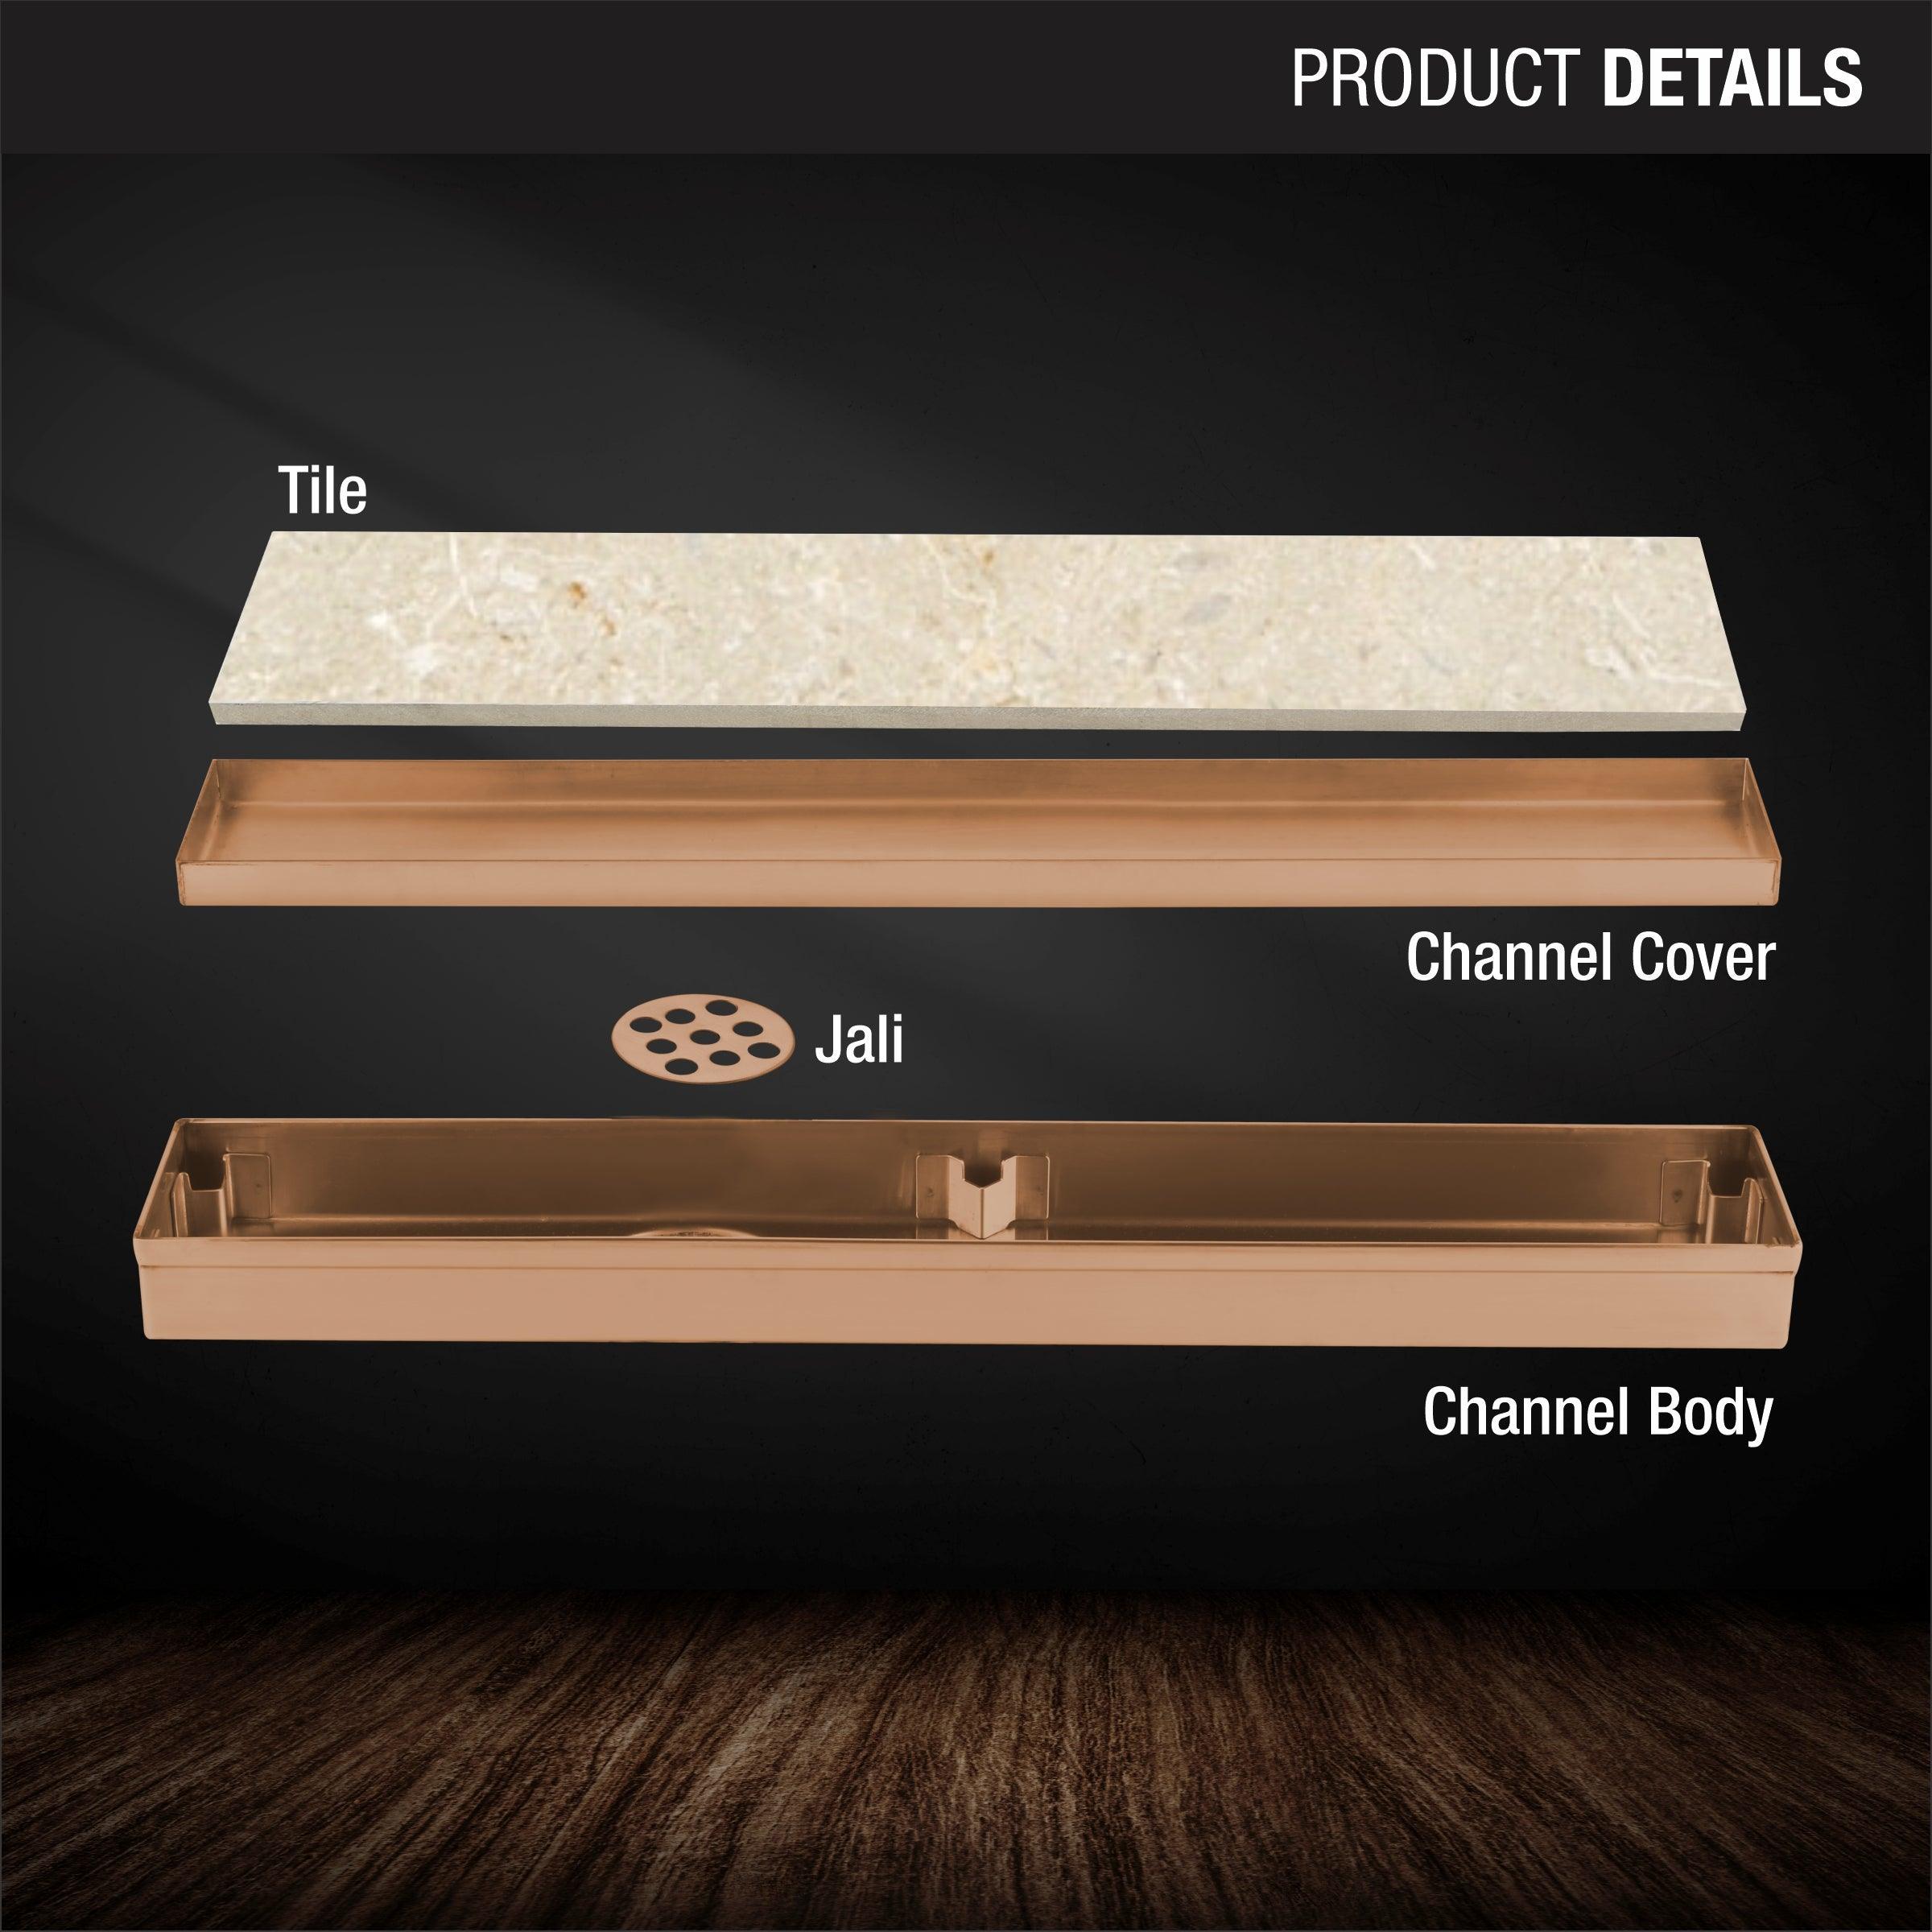 Tile Insert Shower Drain Channel - Yellow Gold (36 x 2 Inches) product details